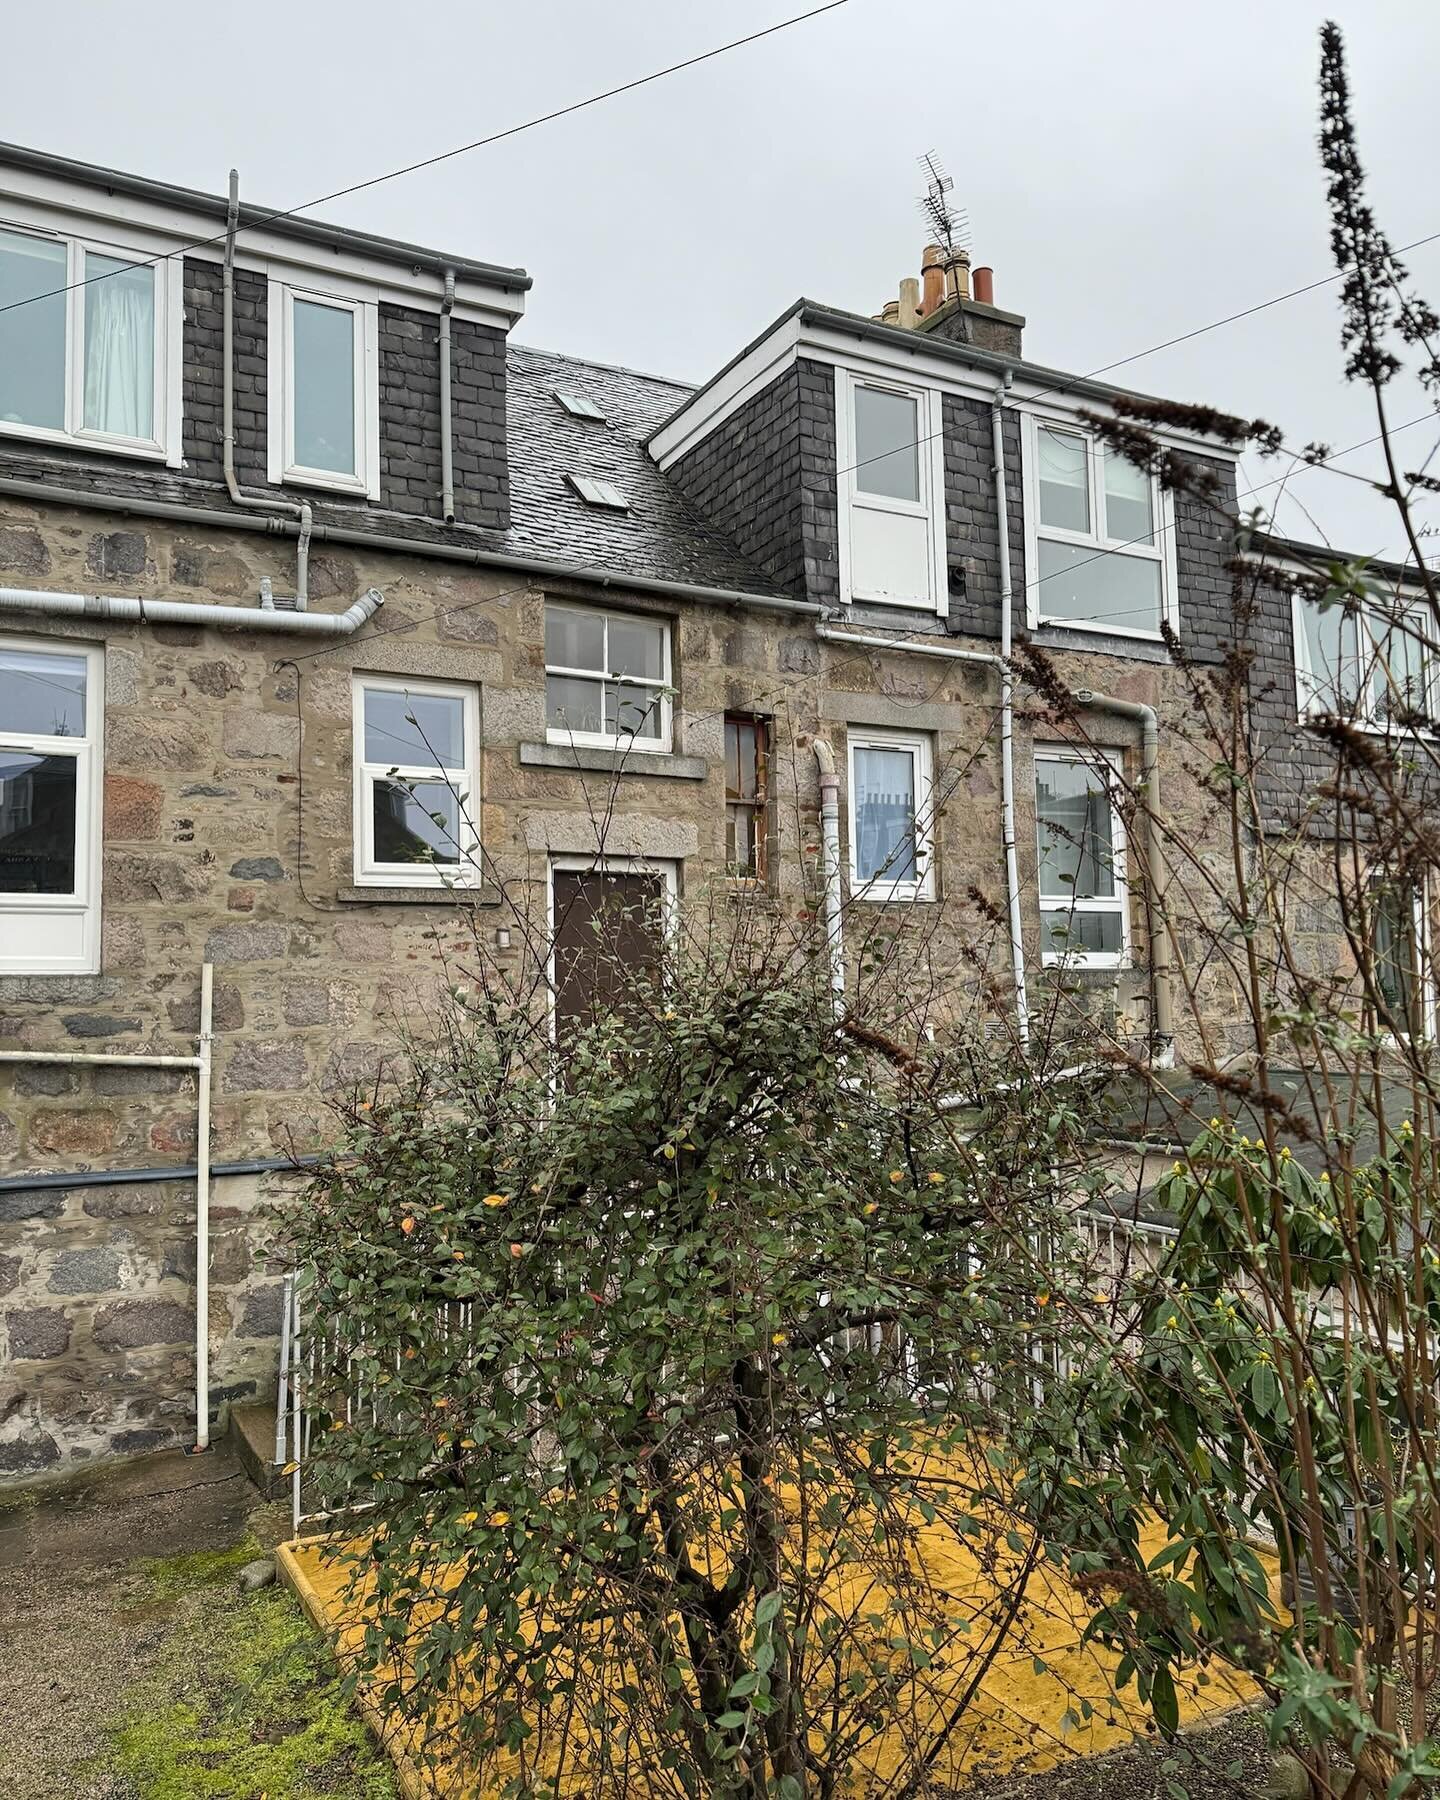 Another day another mortgage done!

We completed on this 2 bedroom top floor flat in Ferryhill, Aberdeen on January 12th. It&rsquo;s pretty turnkey as you can see, now waiting a new tenant but refinanced to pull the money back out to go again. 

Huge